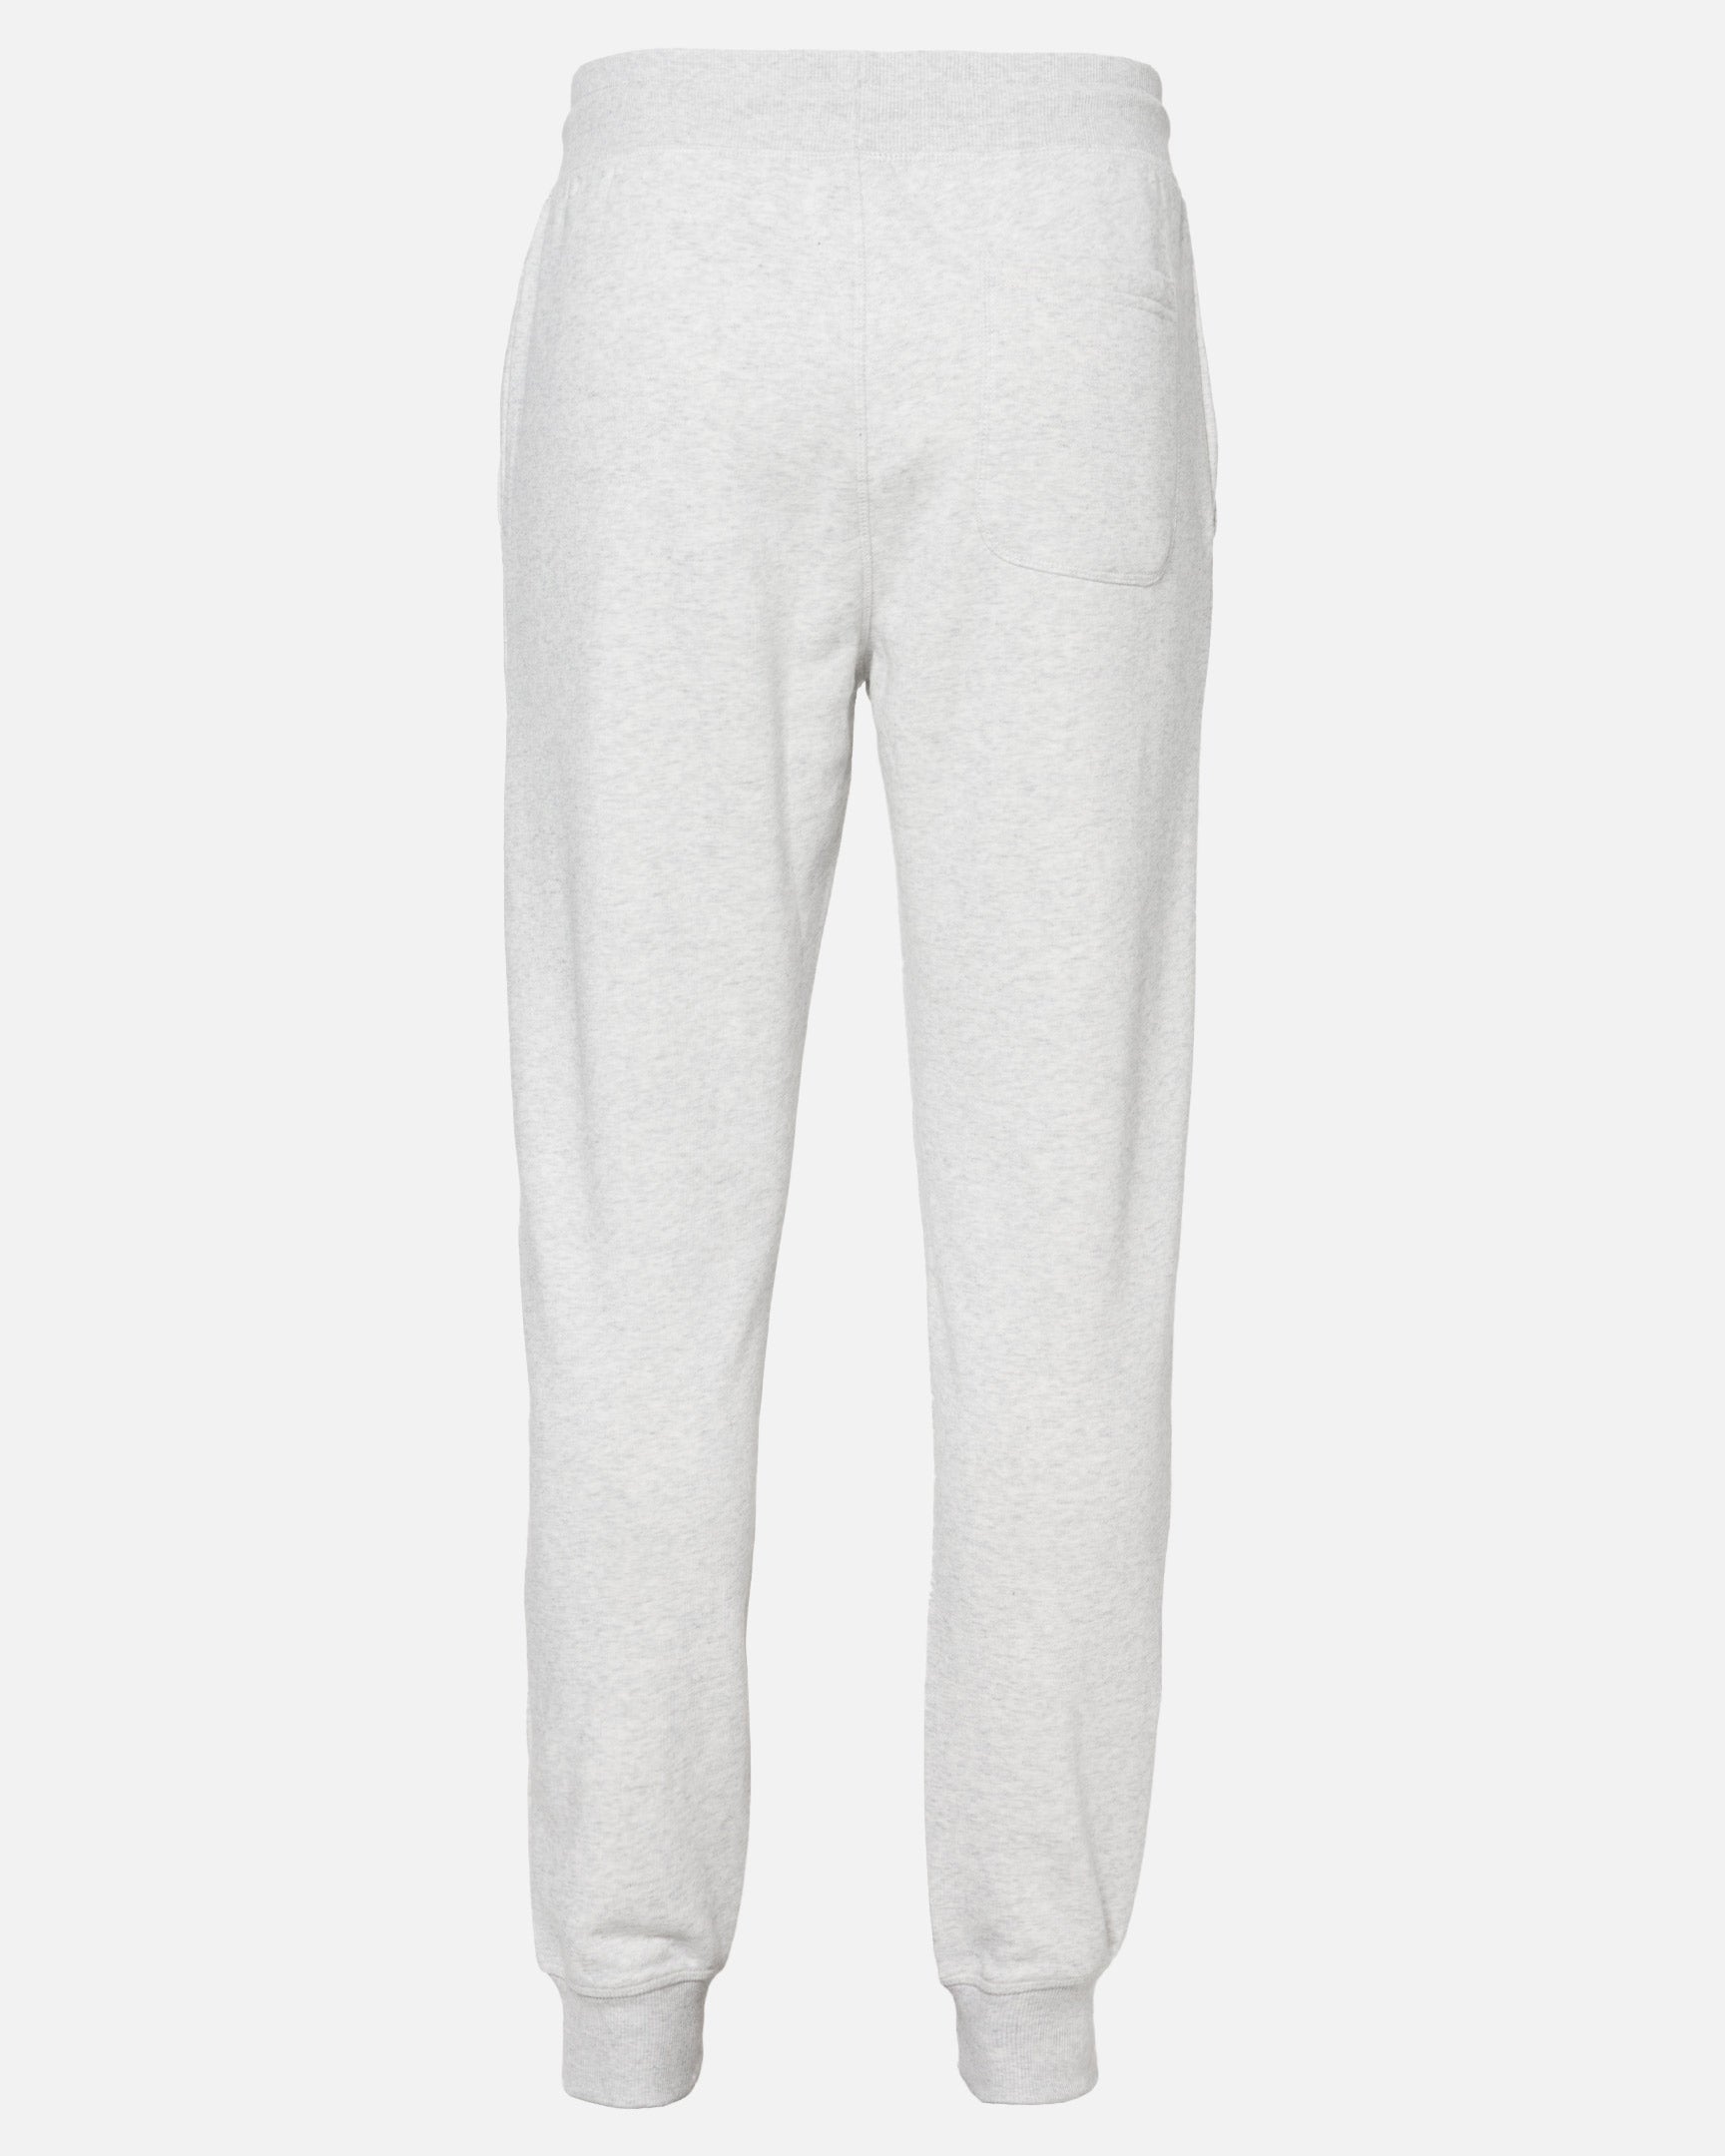 Relaxed Fit Cotton Joggers - Off-white - Men